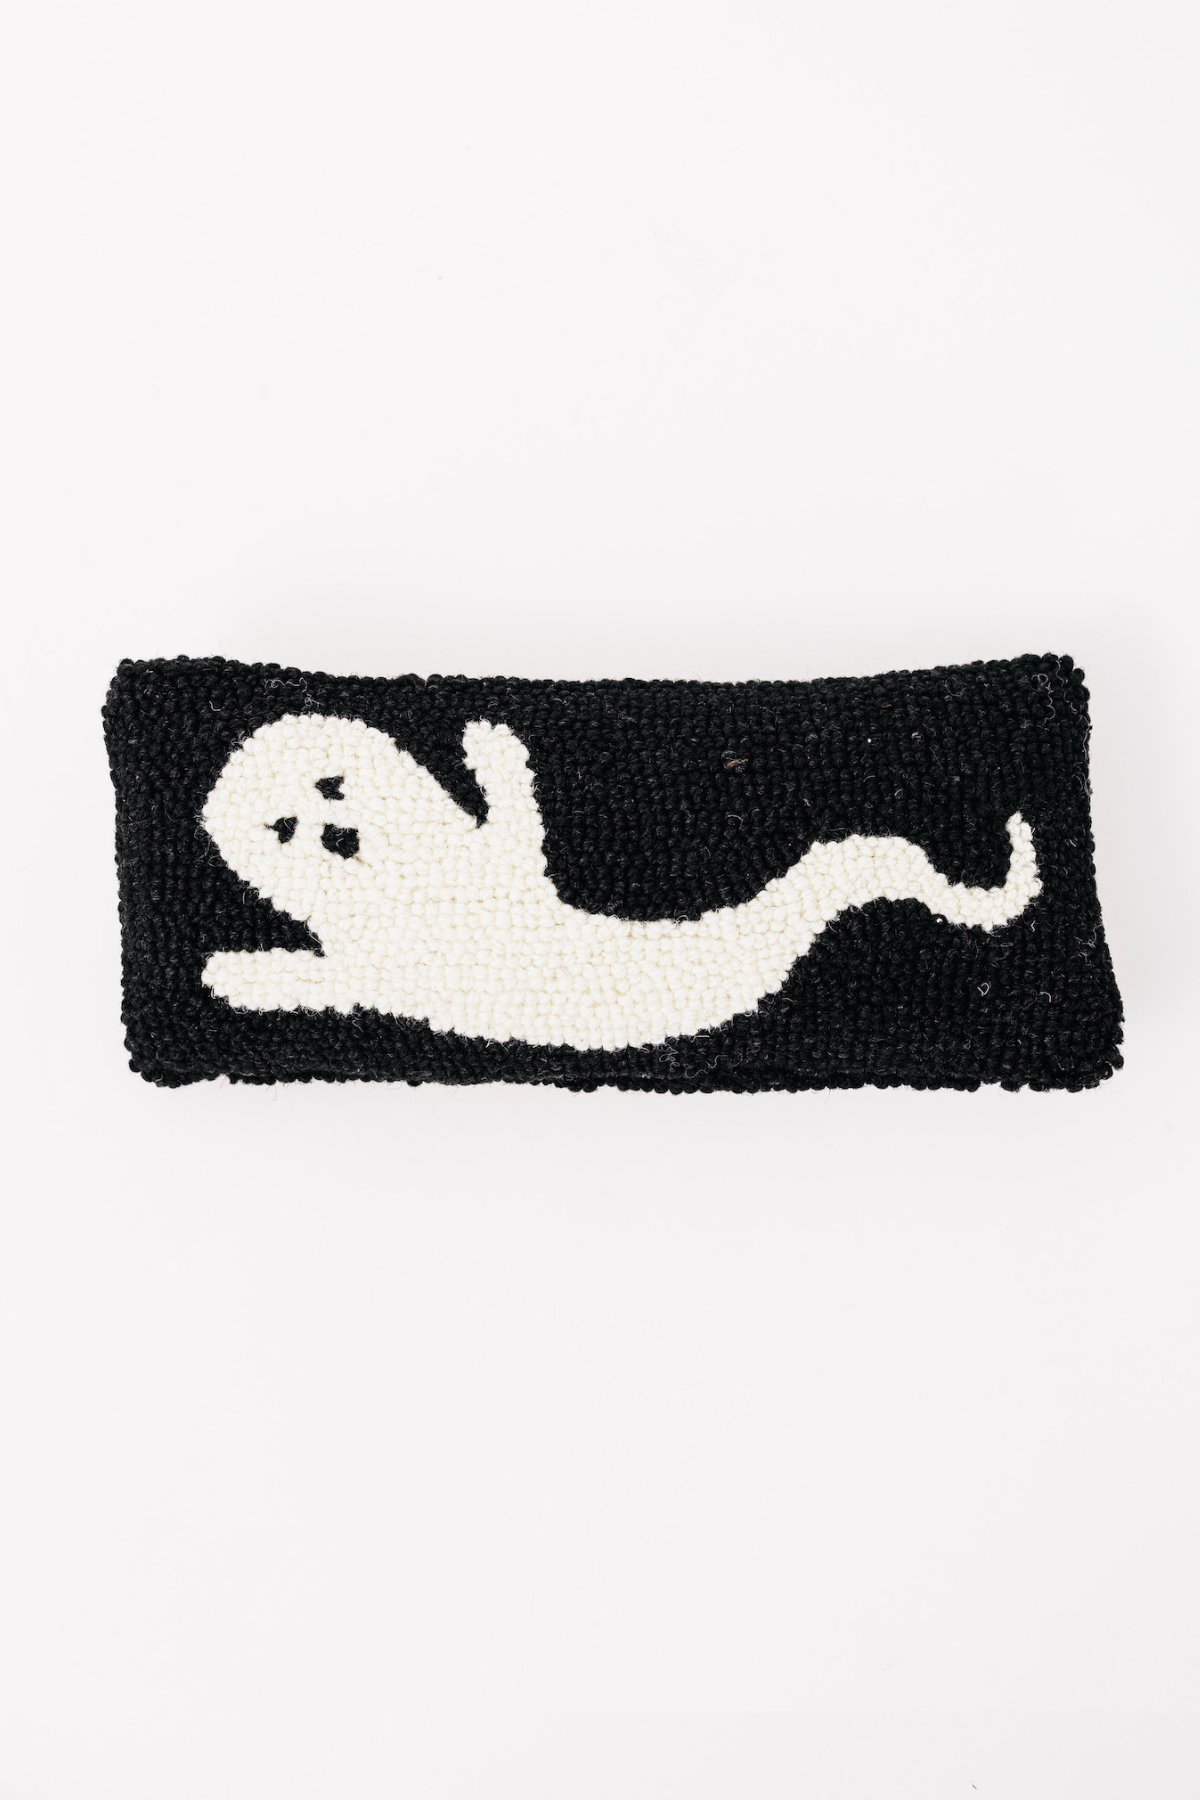 Ghostly Mini Pillow